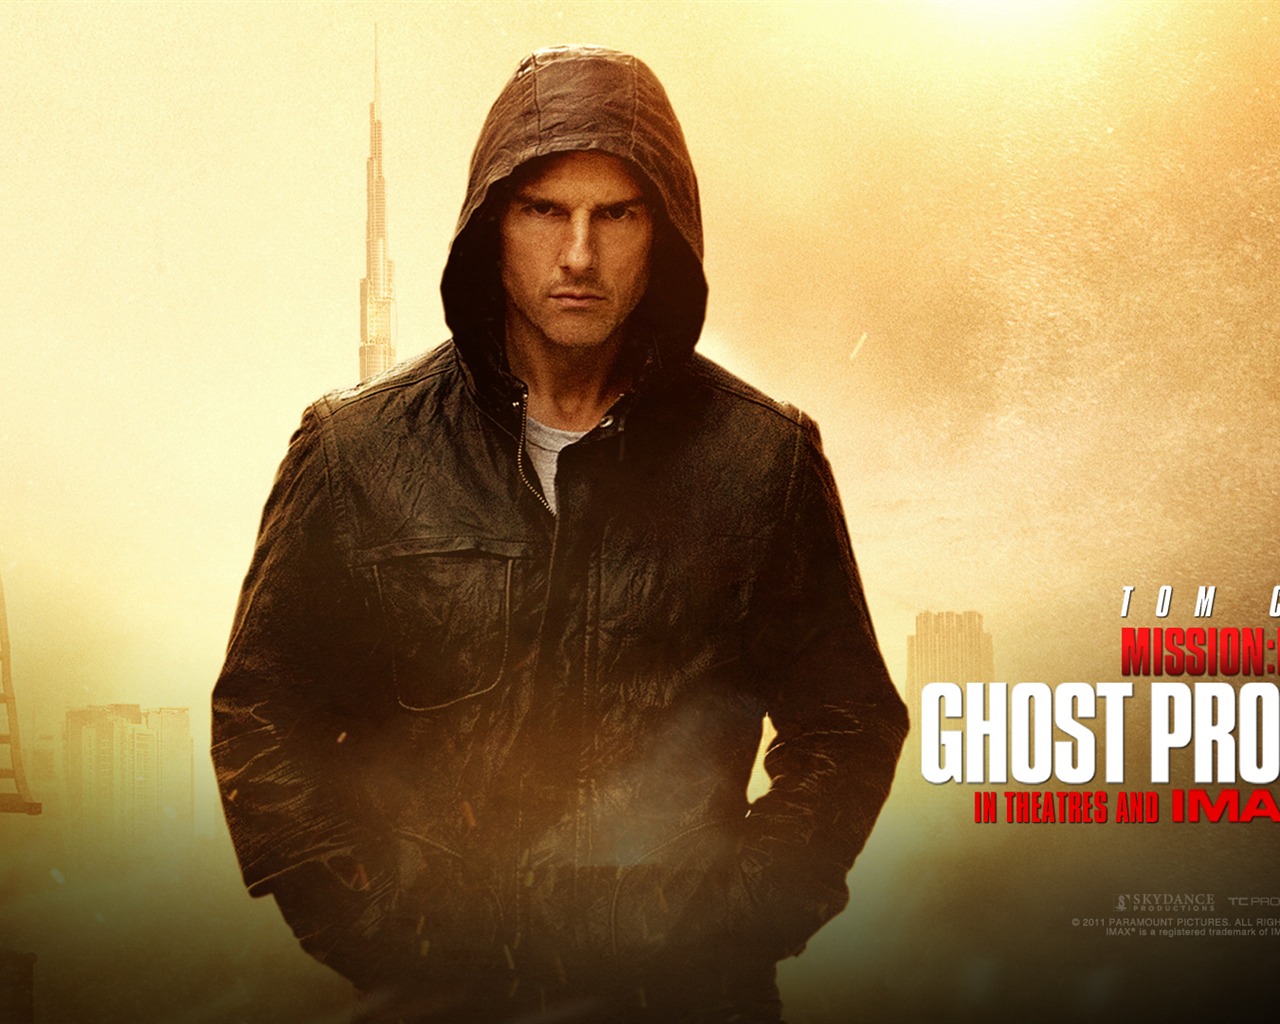 Mission: Impossible - Ghost Protocol 碟中谍4 高清壁纸9 - 1280x1024